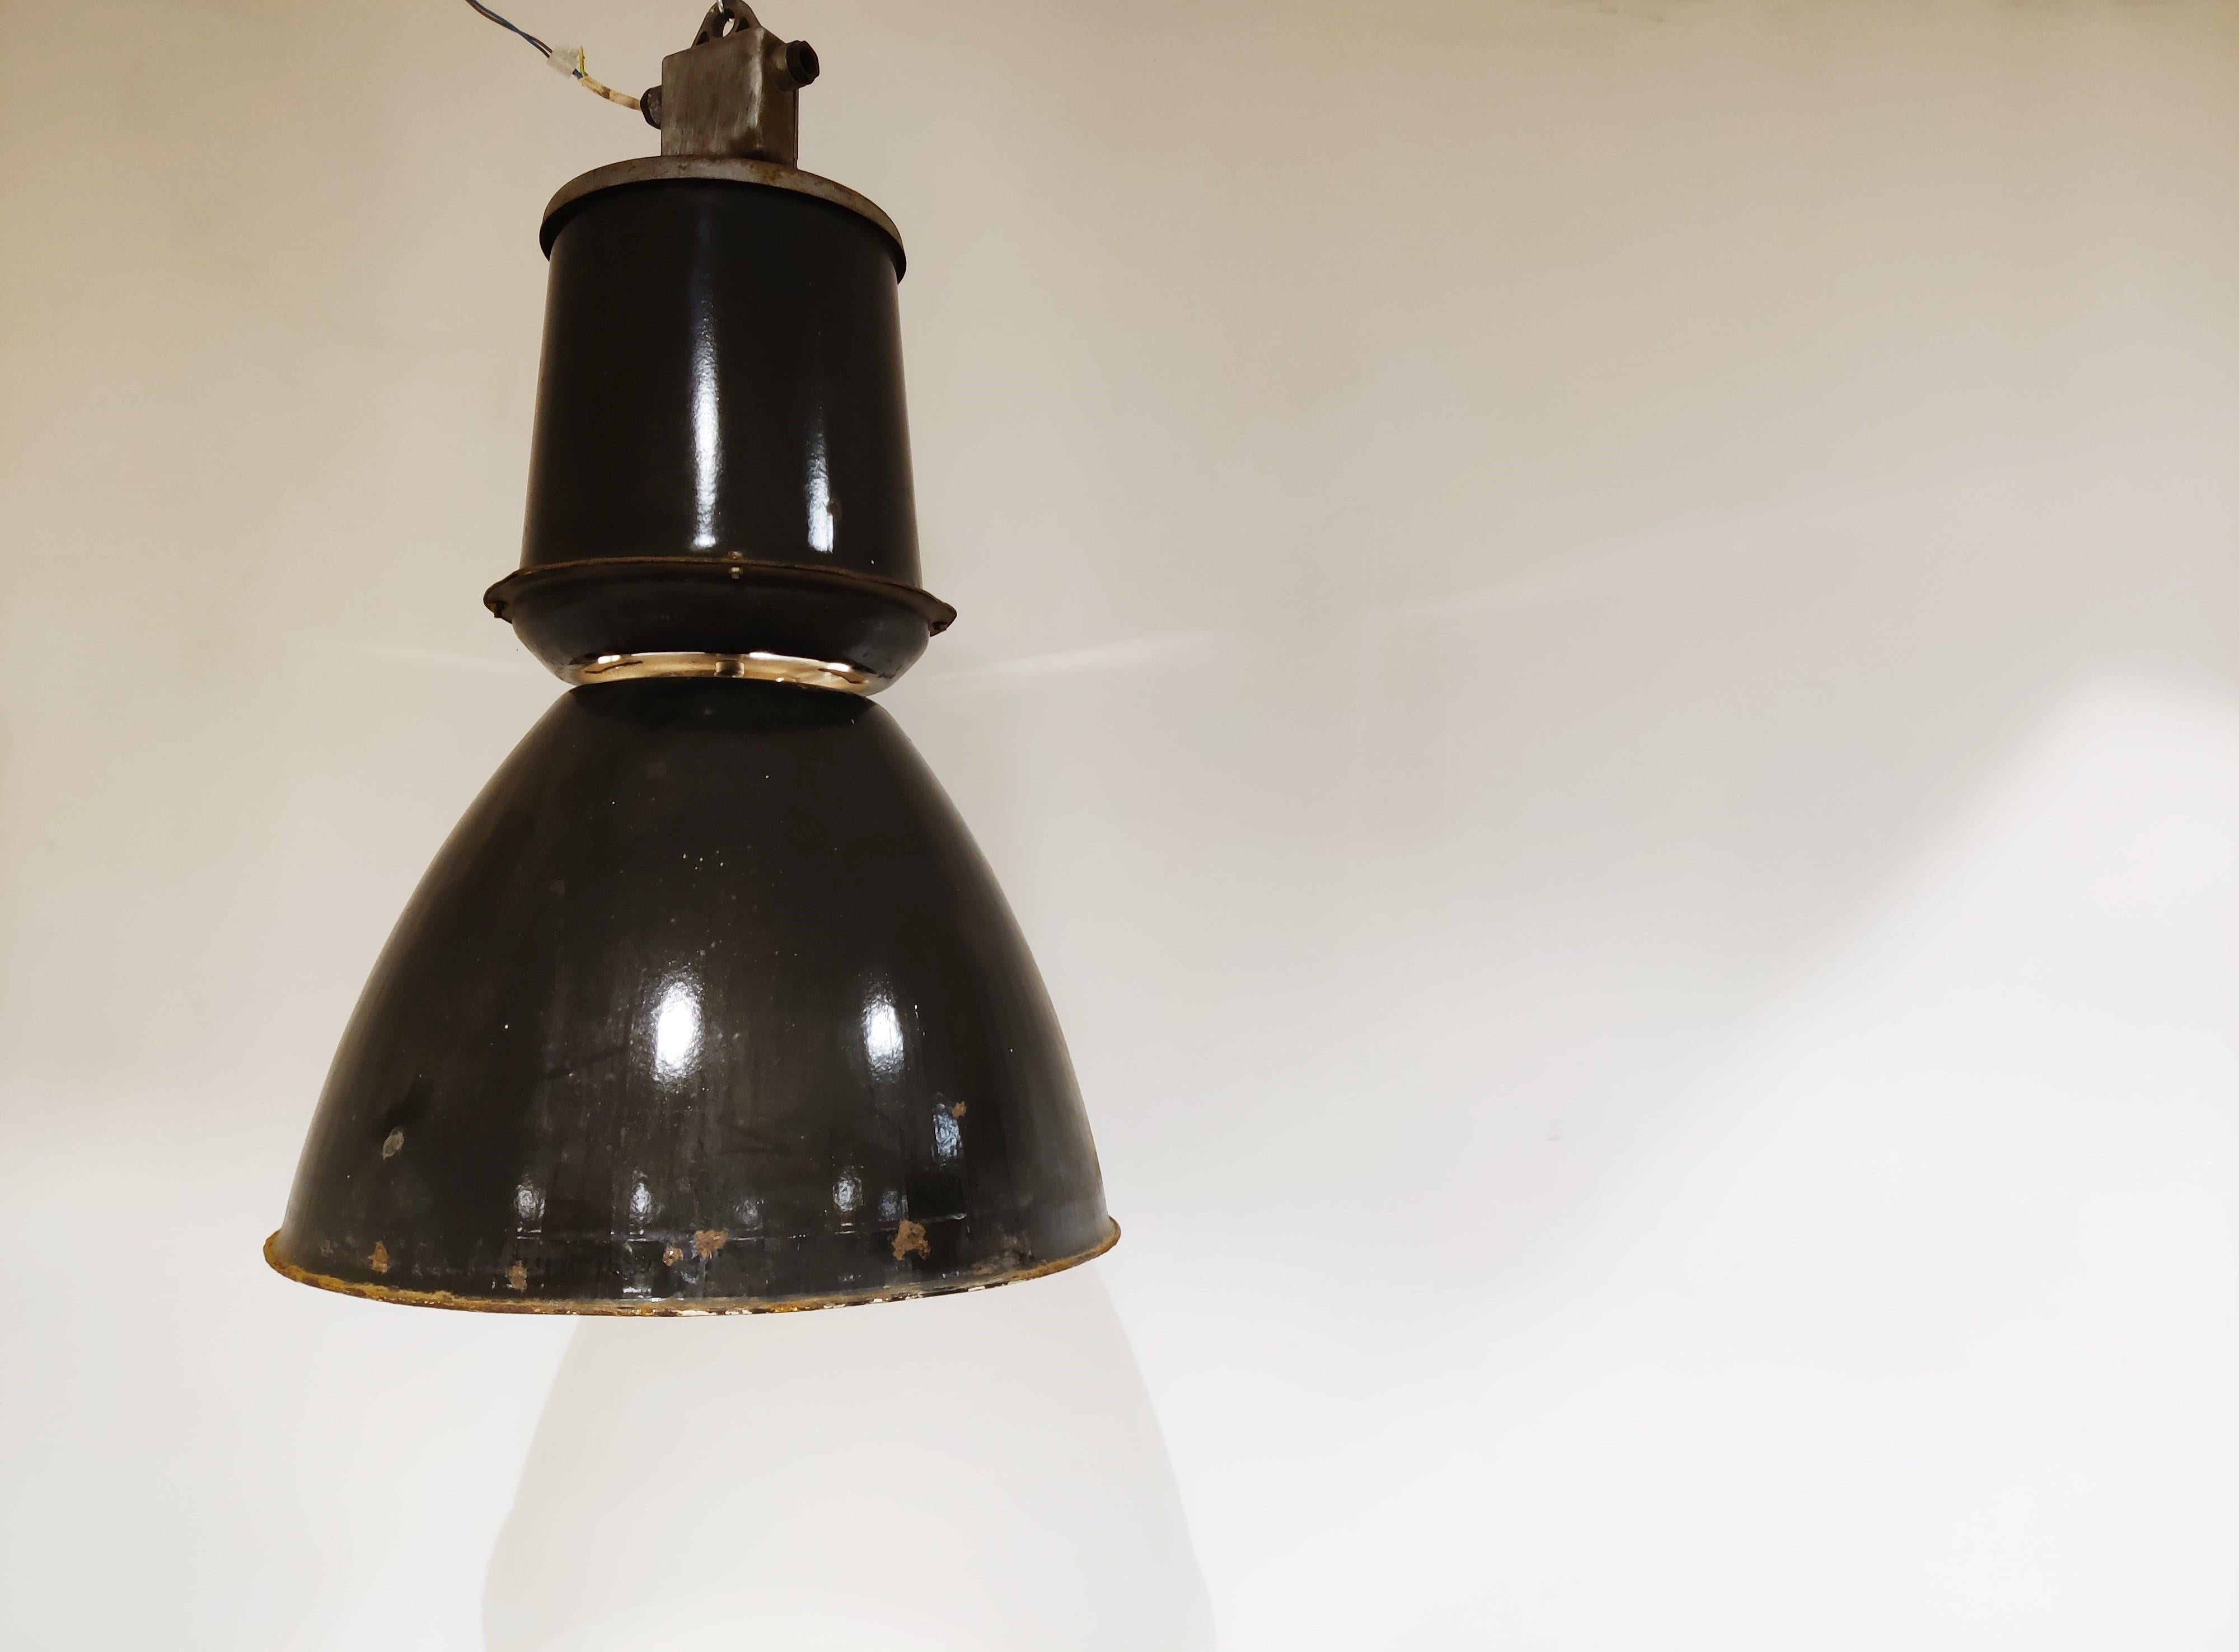 Impressive heavy duty industrial lamps with a cast iron top and enamel lamp shades.

The lamps have a nice Industrial look and would be a lovely contrast for a modern interior.

Great for a bar, and restaurant, shop,..

Rewired, tested and